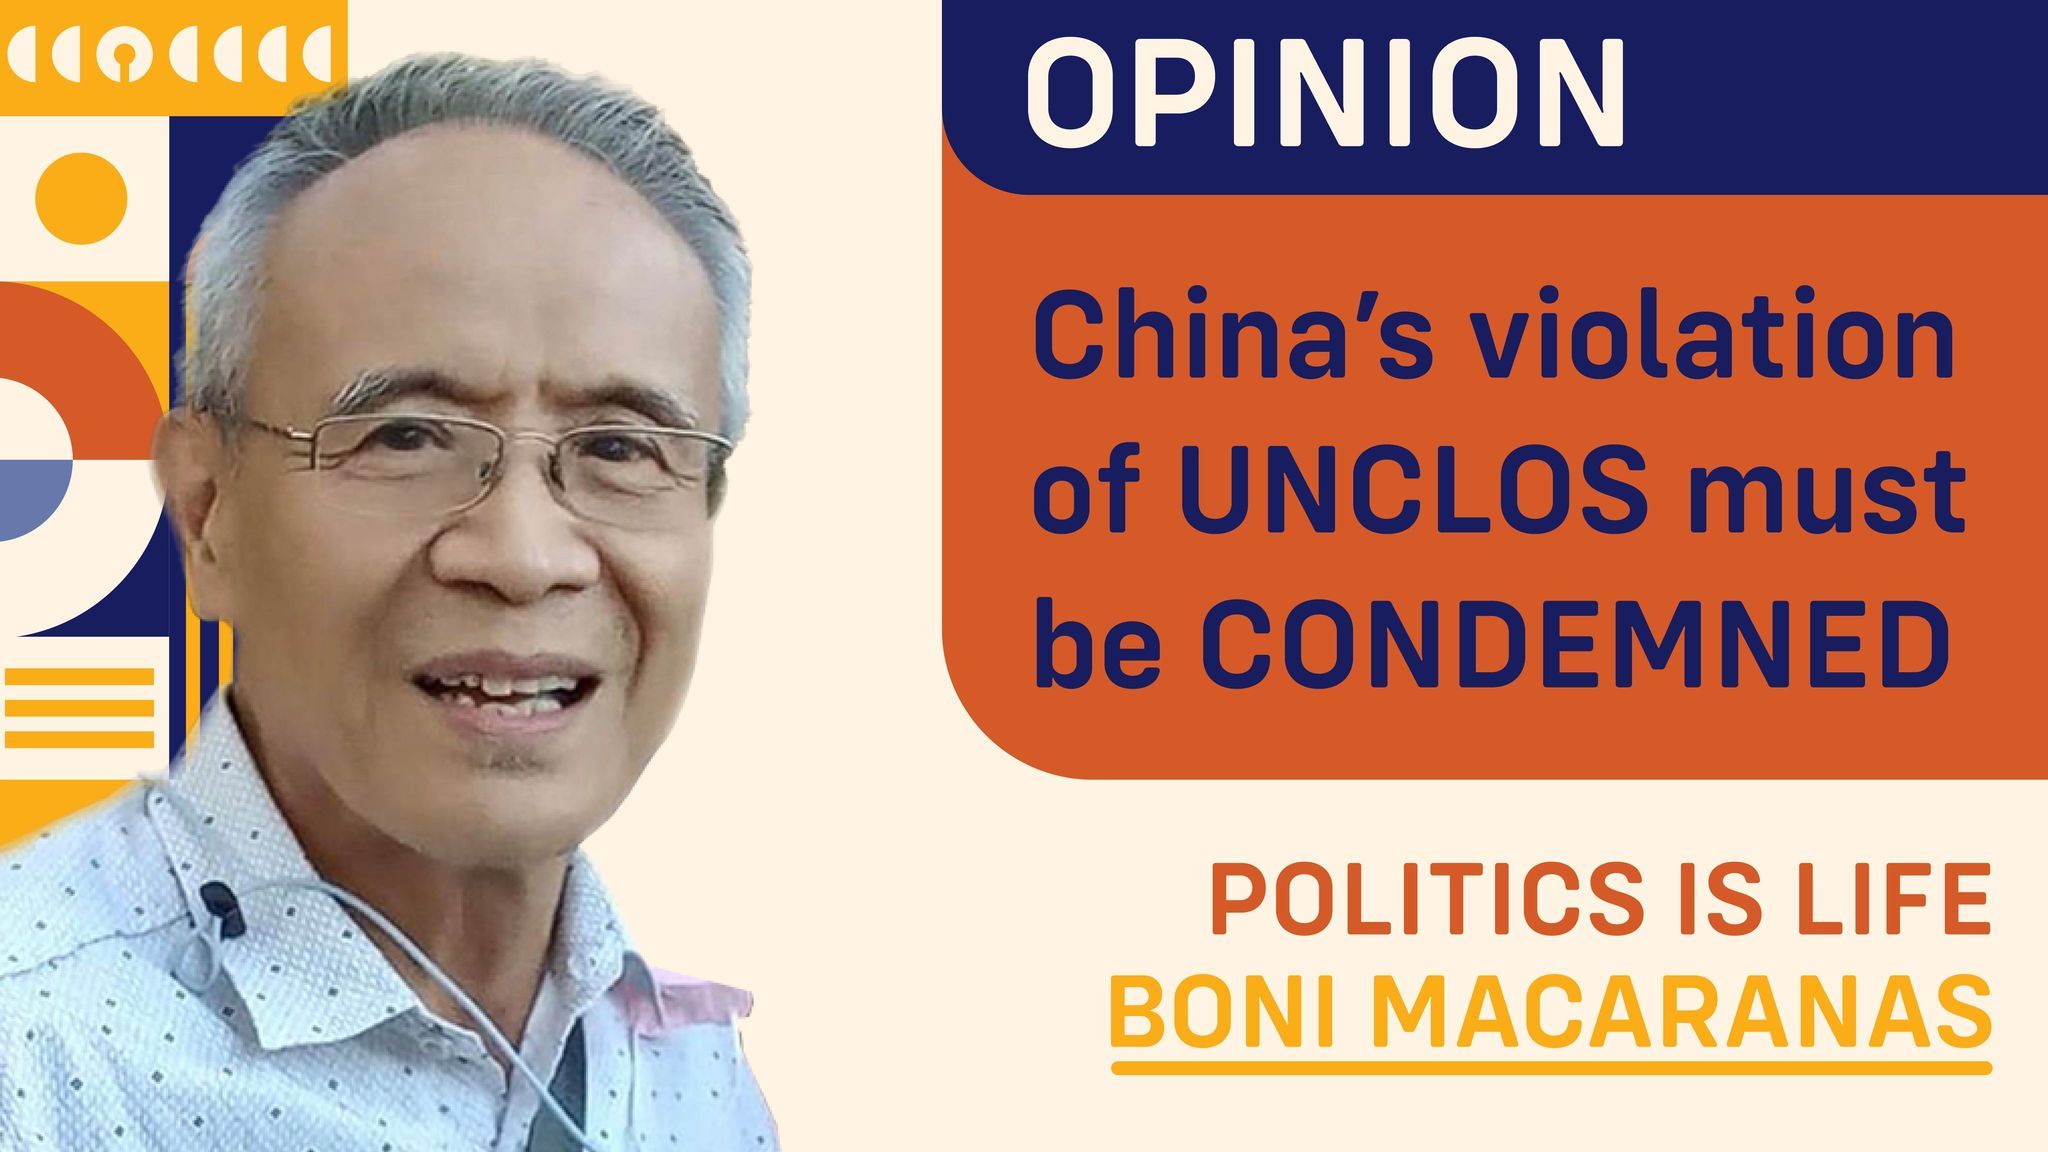 China’s violation of UNCLOS must be CONDEMNED